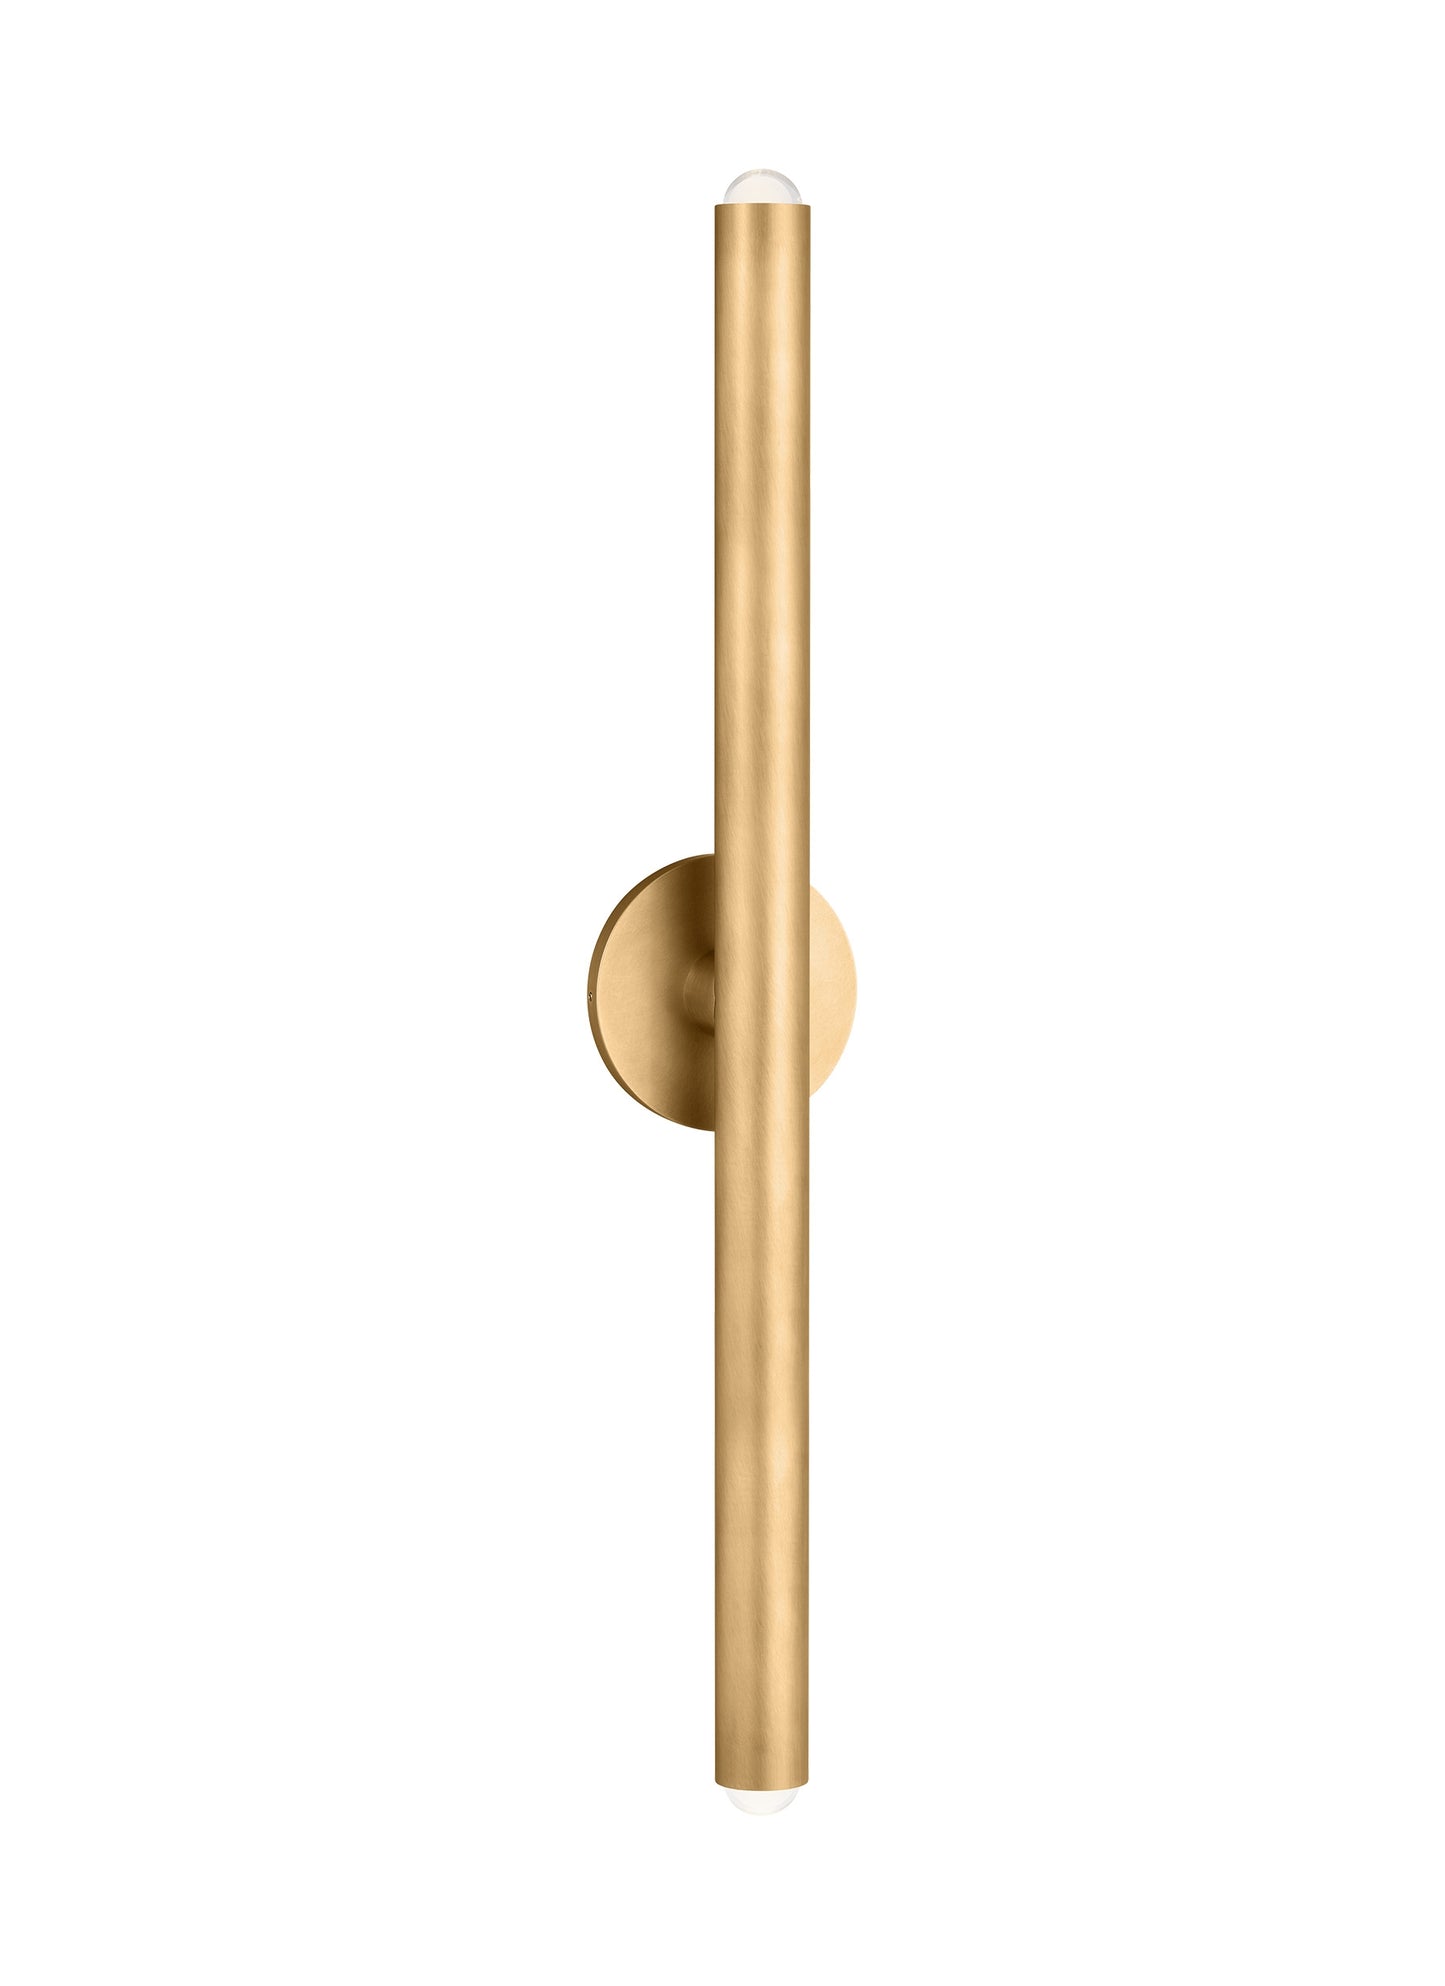 Ebell Wall Sconce - Large | Visual Comfort Modern